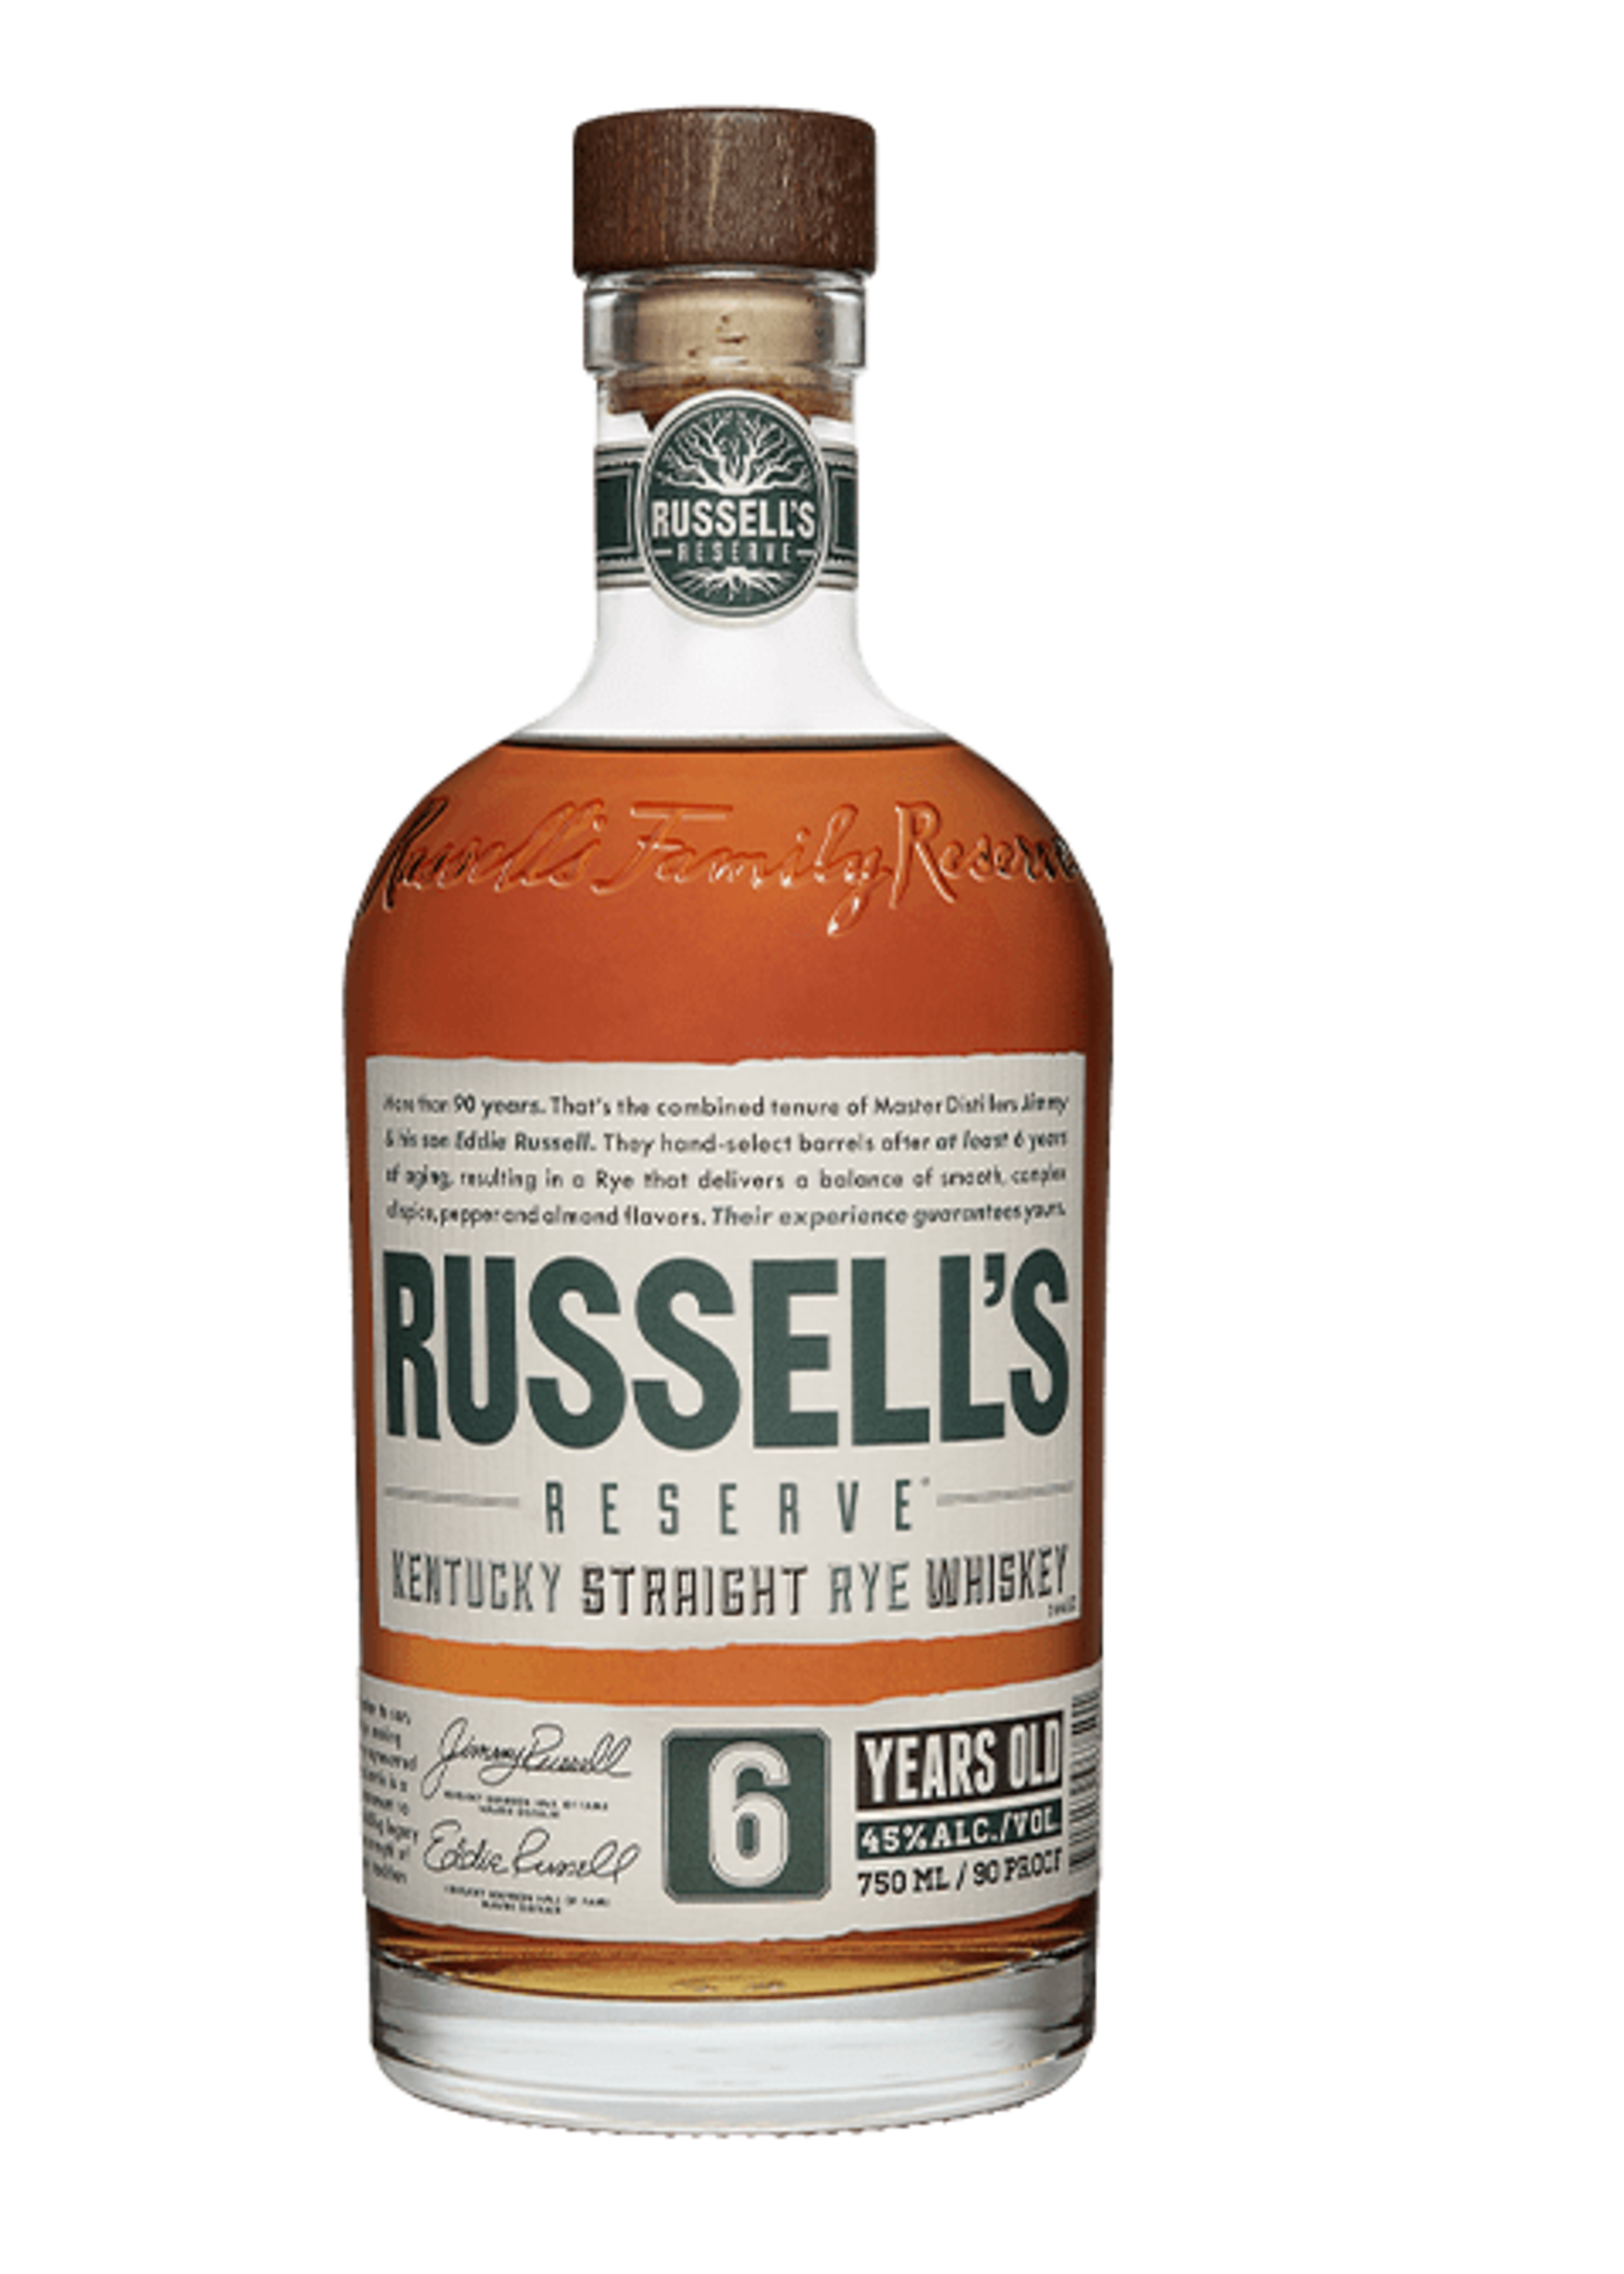 Russell's Reserve Russell’s Reserve / 6 Year Rye Whisky 45% abv / 750mL